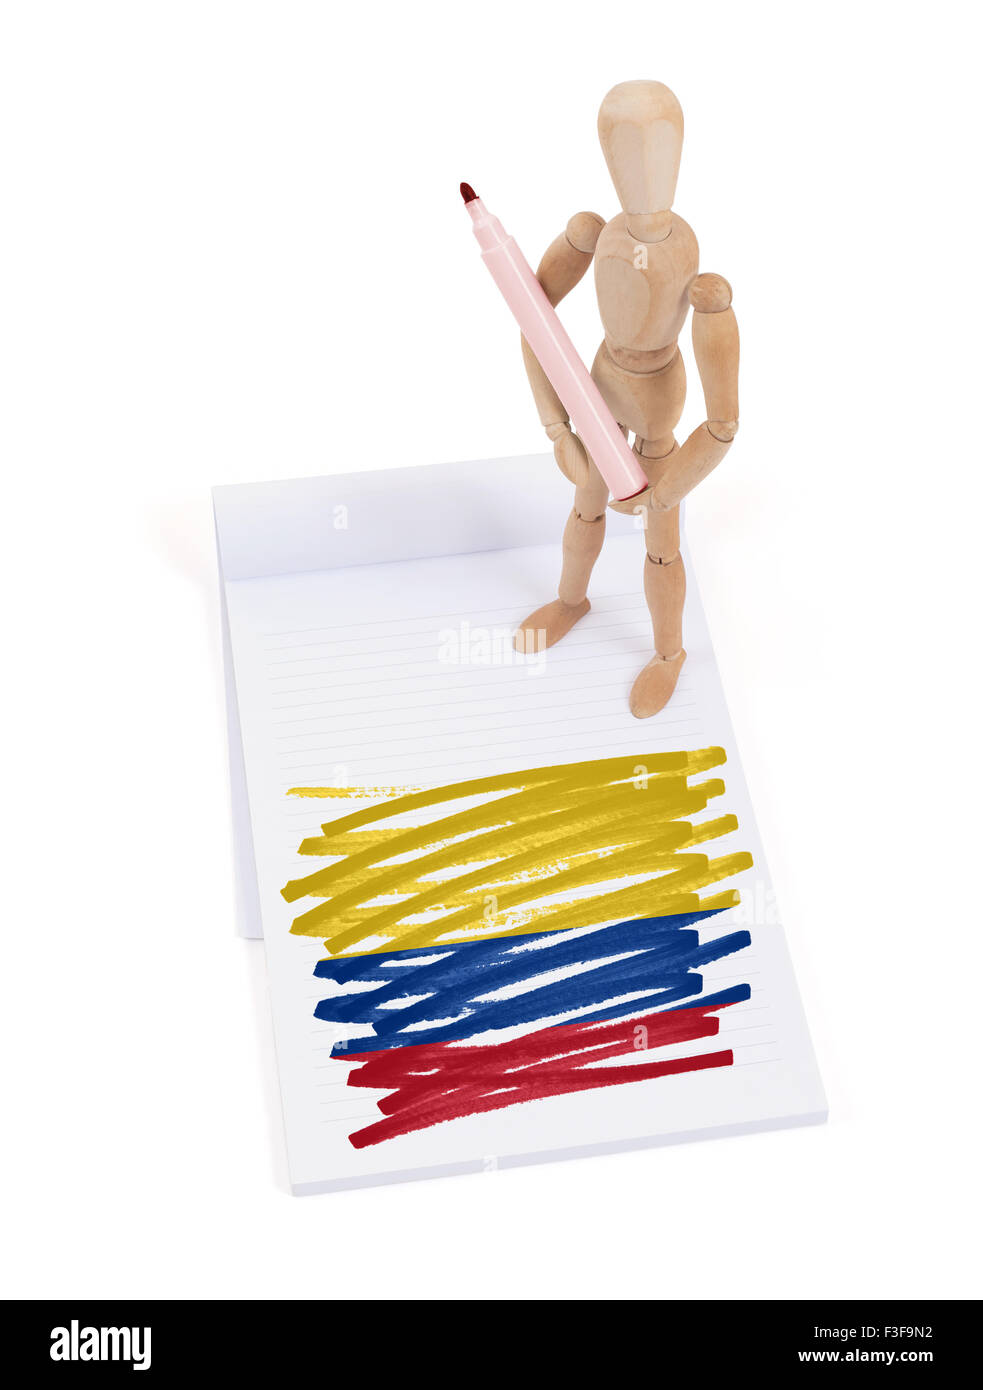 Wooden mannequin made a drawing of a flag - Colombia Stock Photo